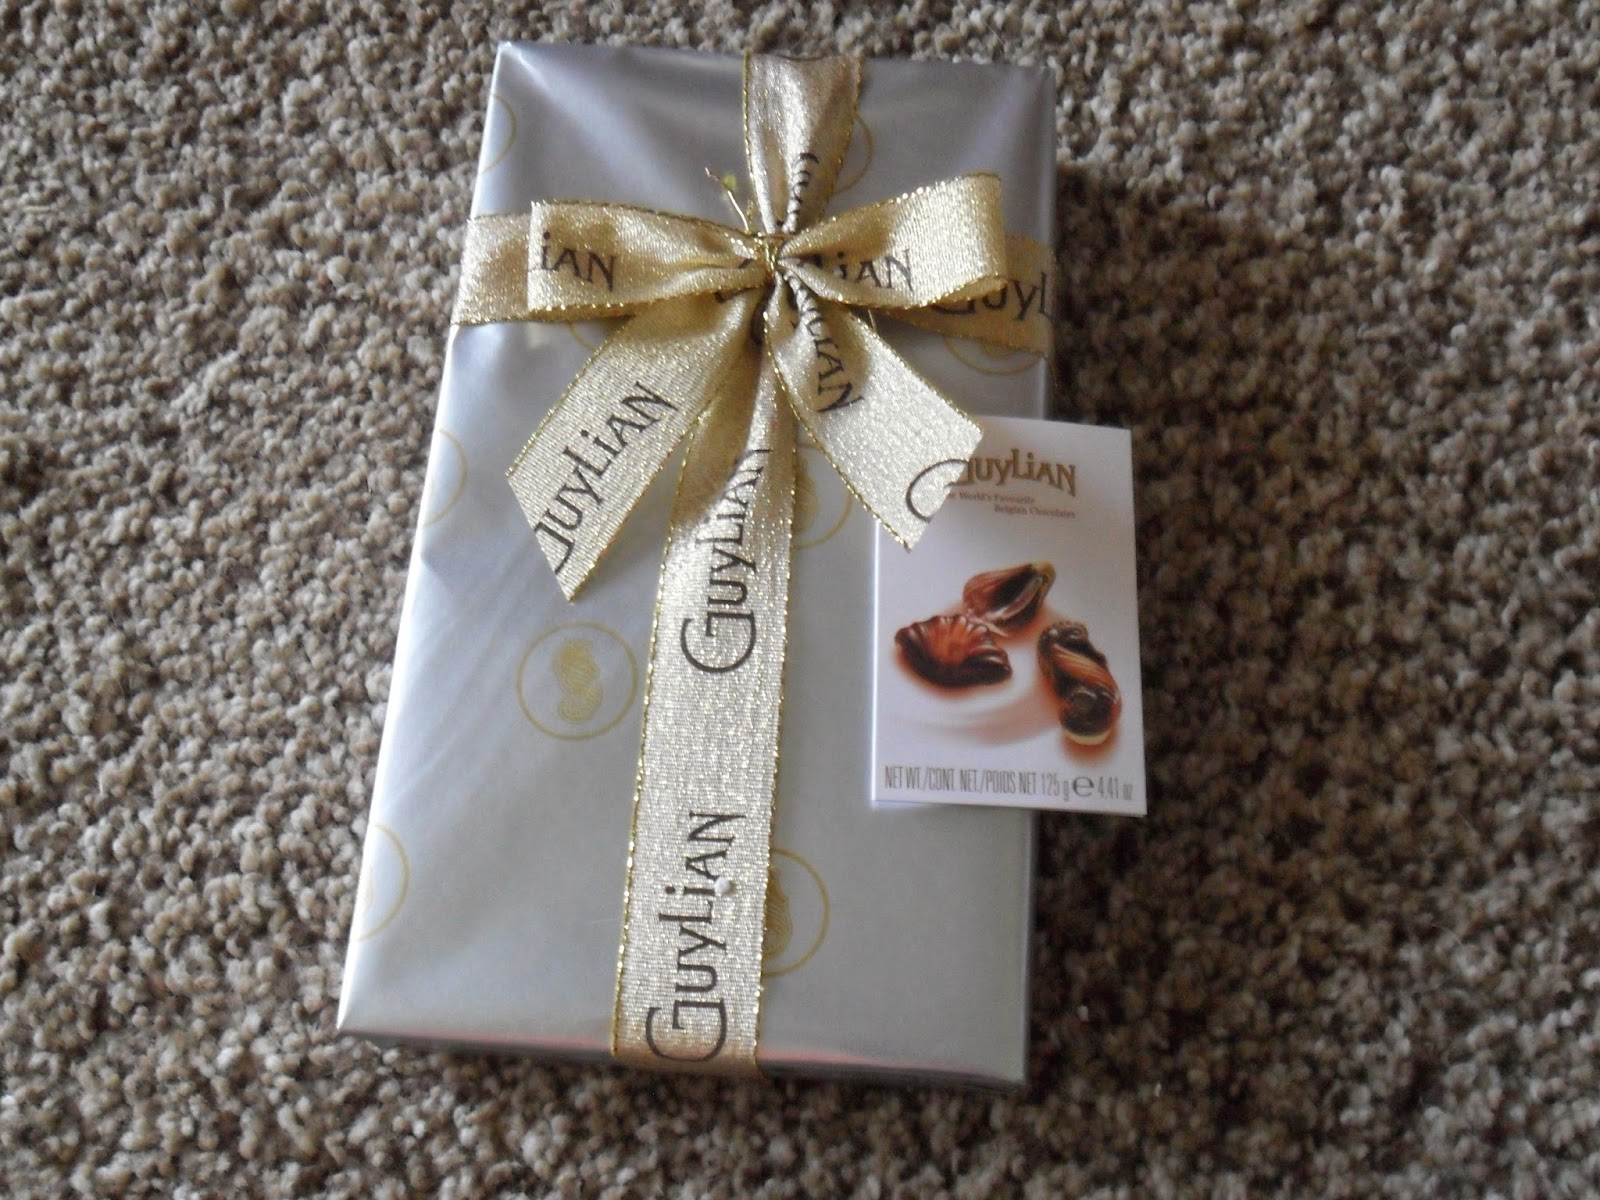 From Belgium with  love Guylian Belgian Chocolate.Review and giveaway